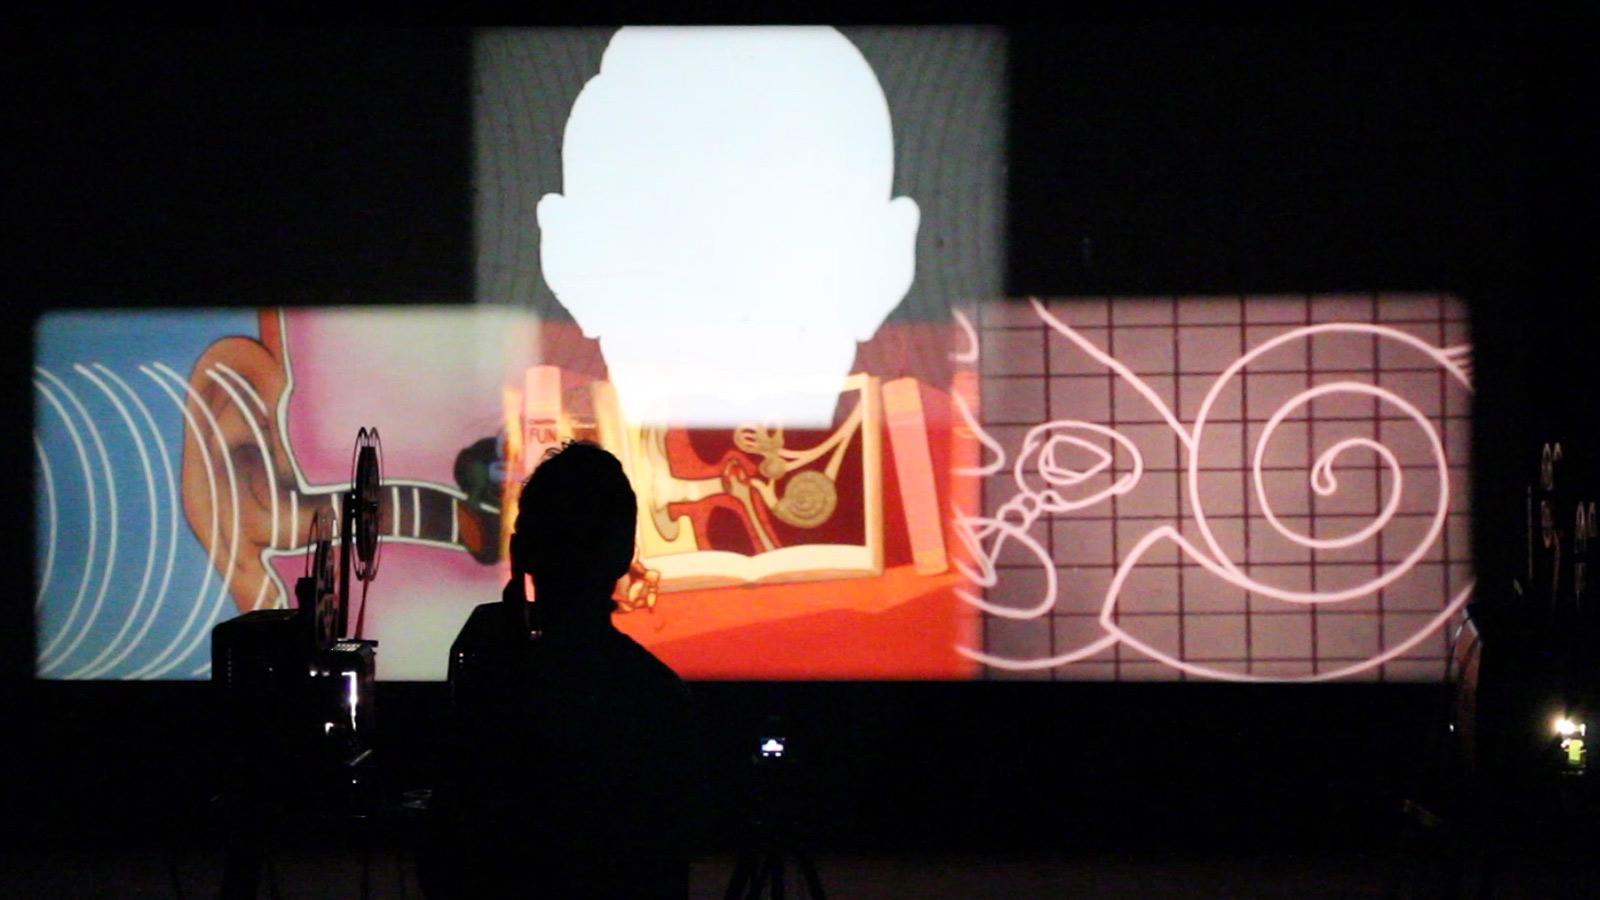 Still of Roger Beebe's multi-projected images